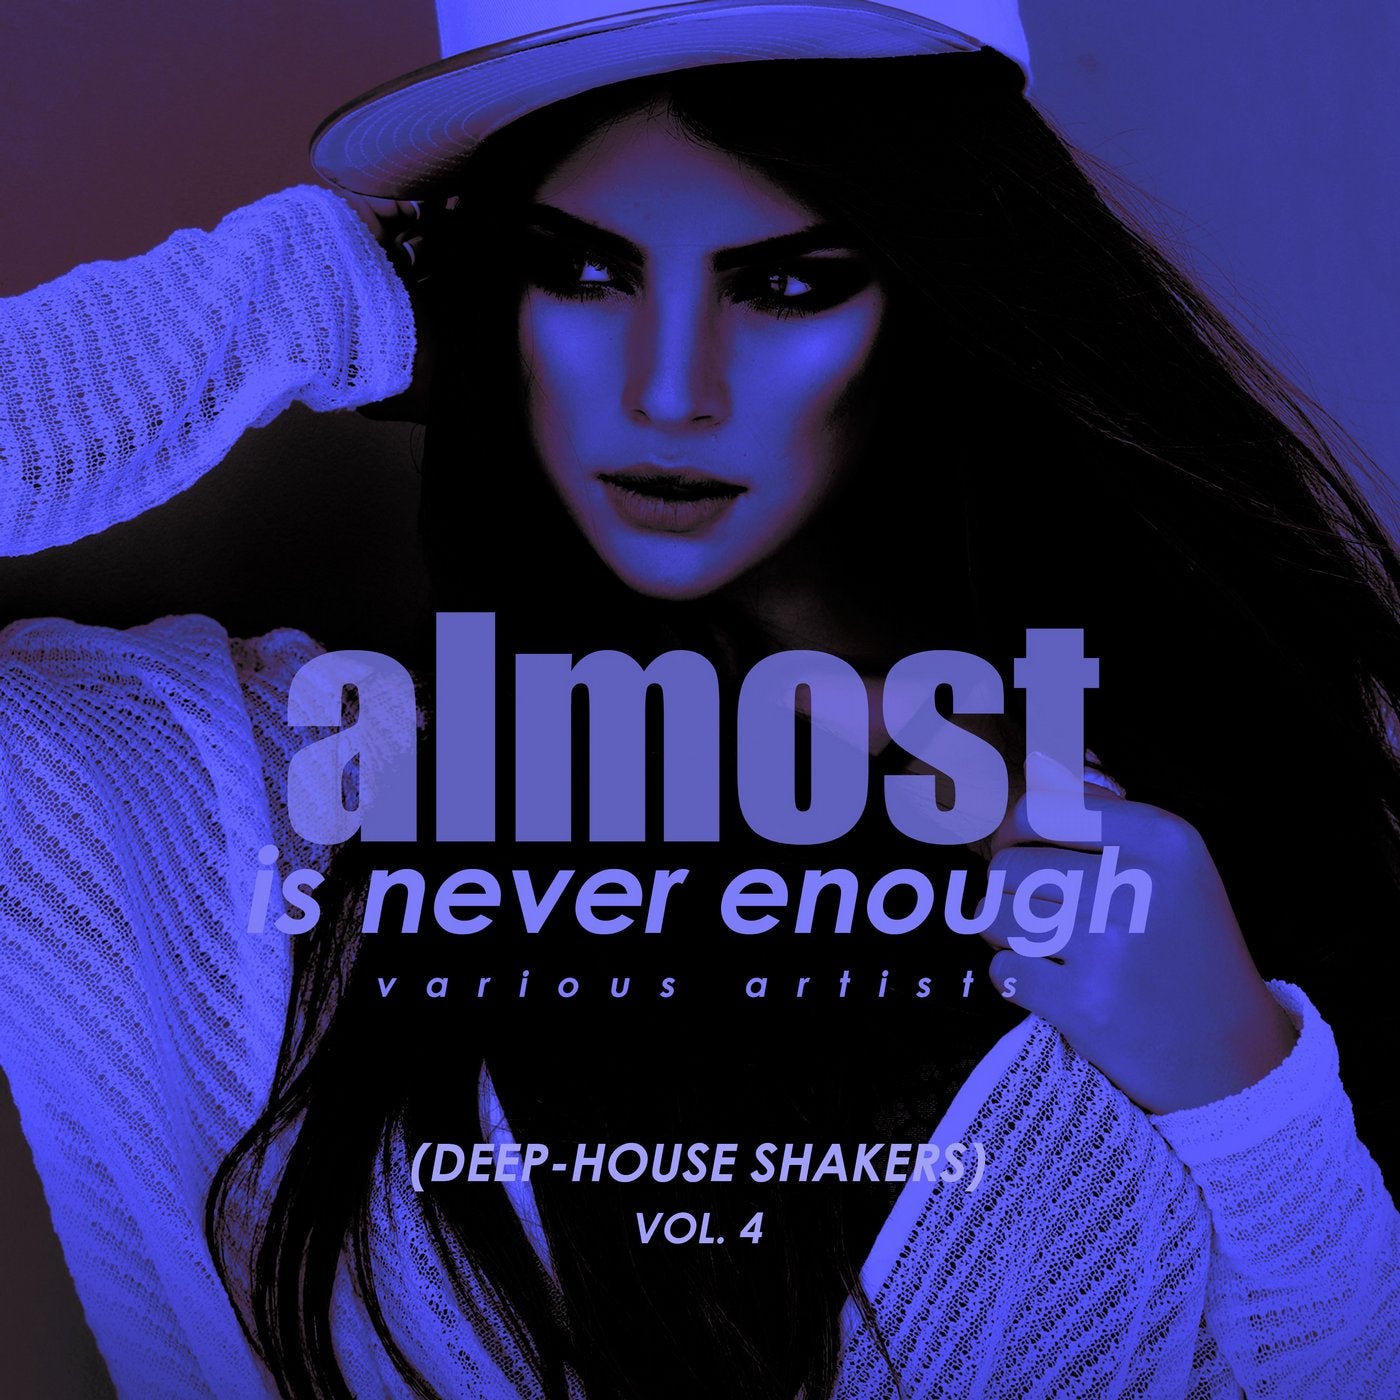 Almost Is Never Enough, Vol. 4 (Deep-House Shakers)